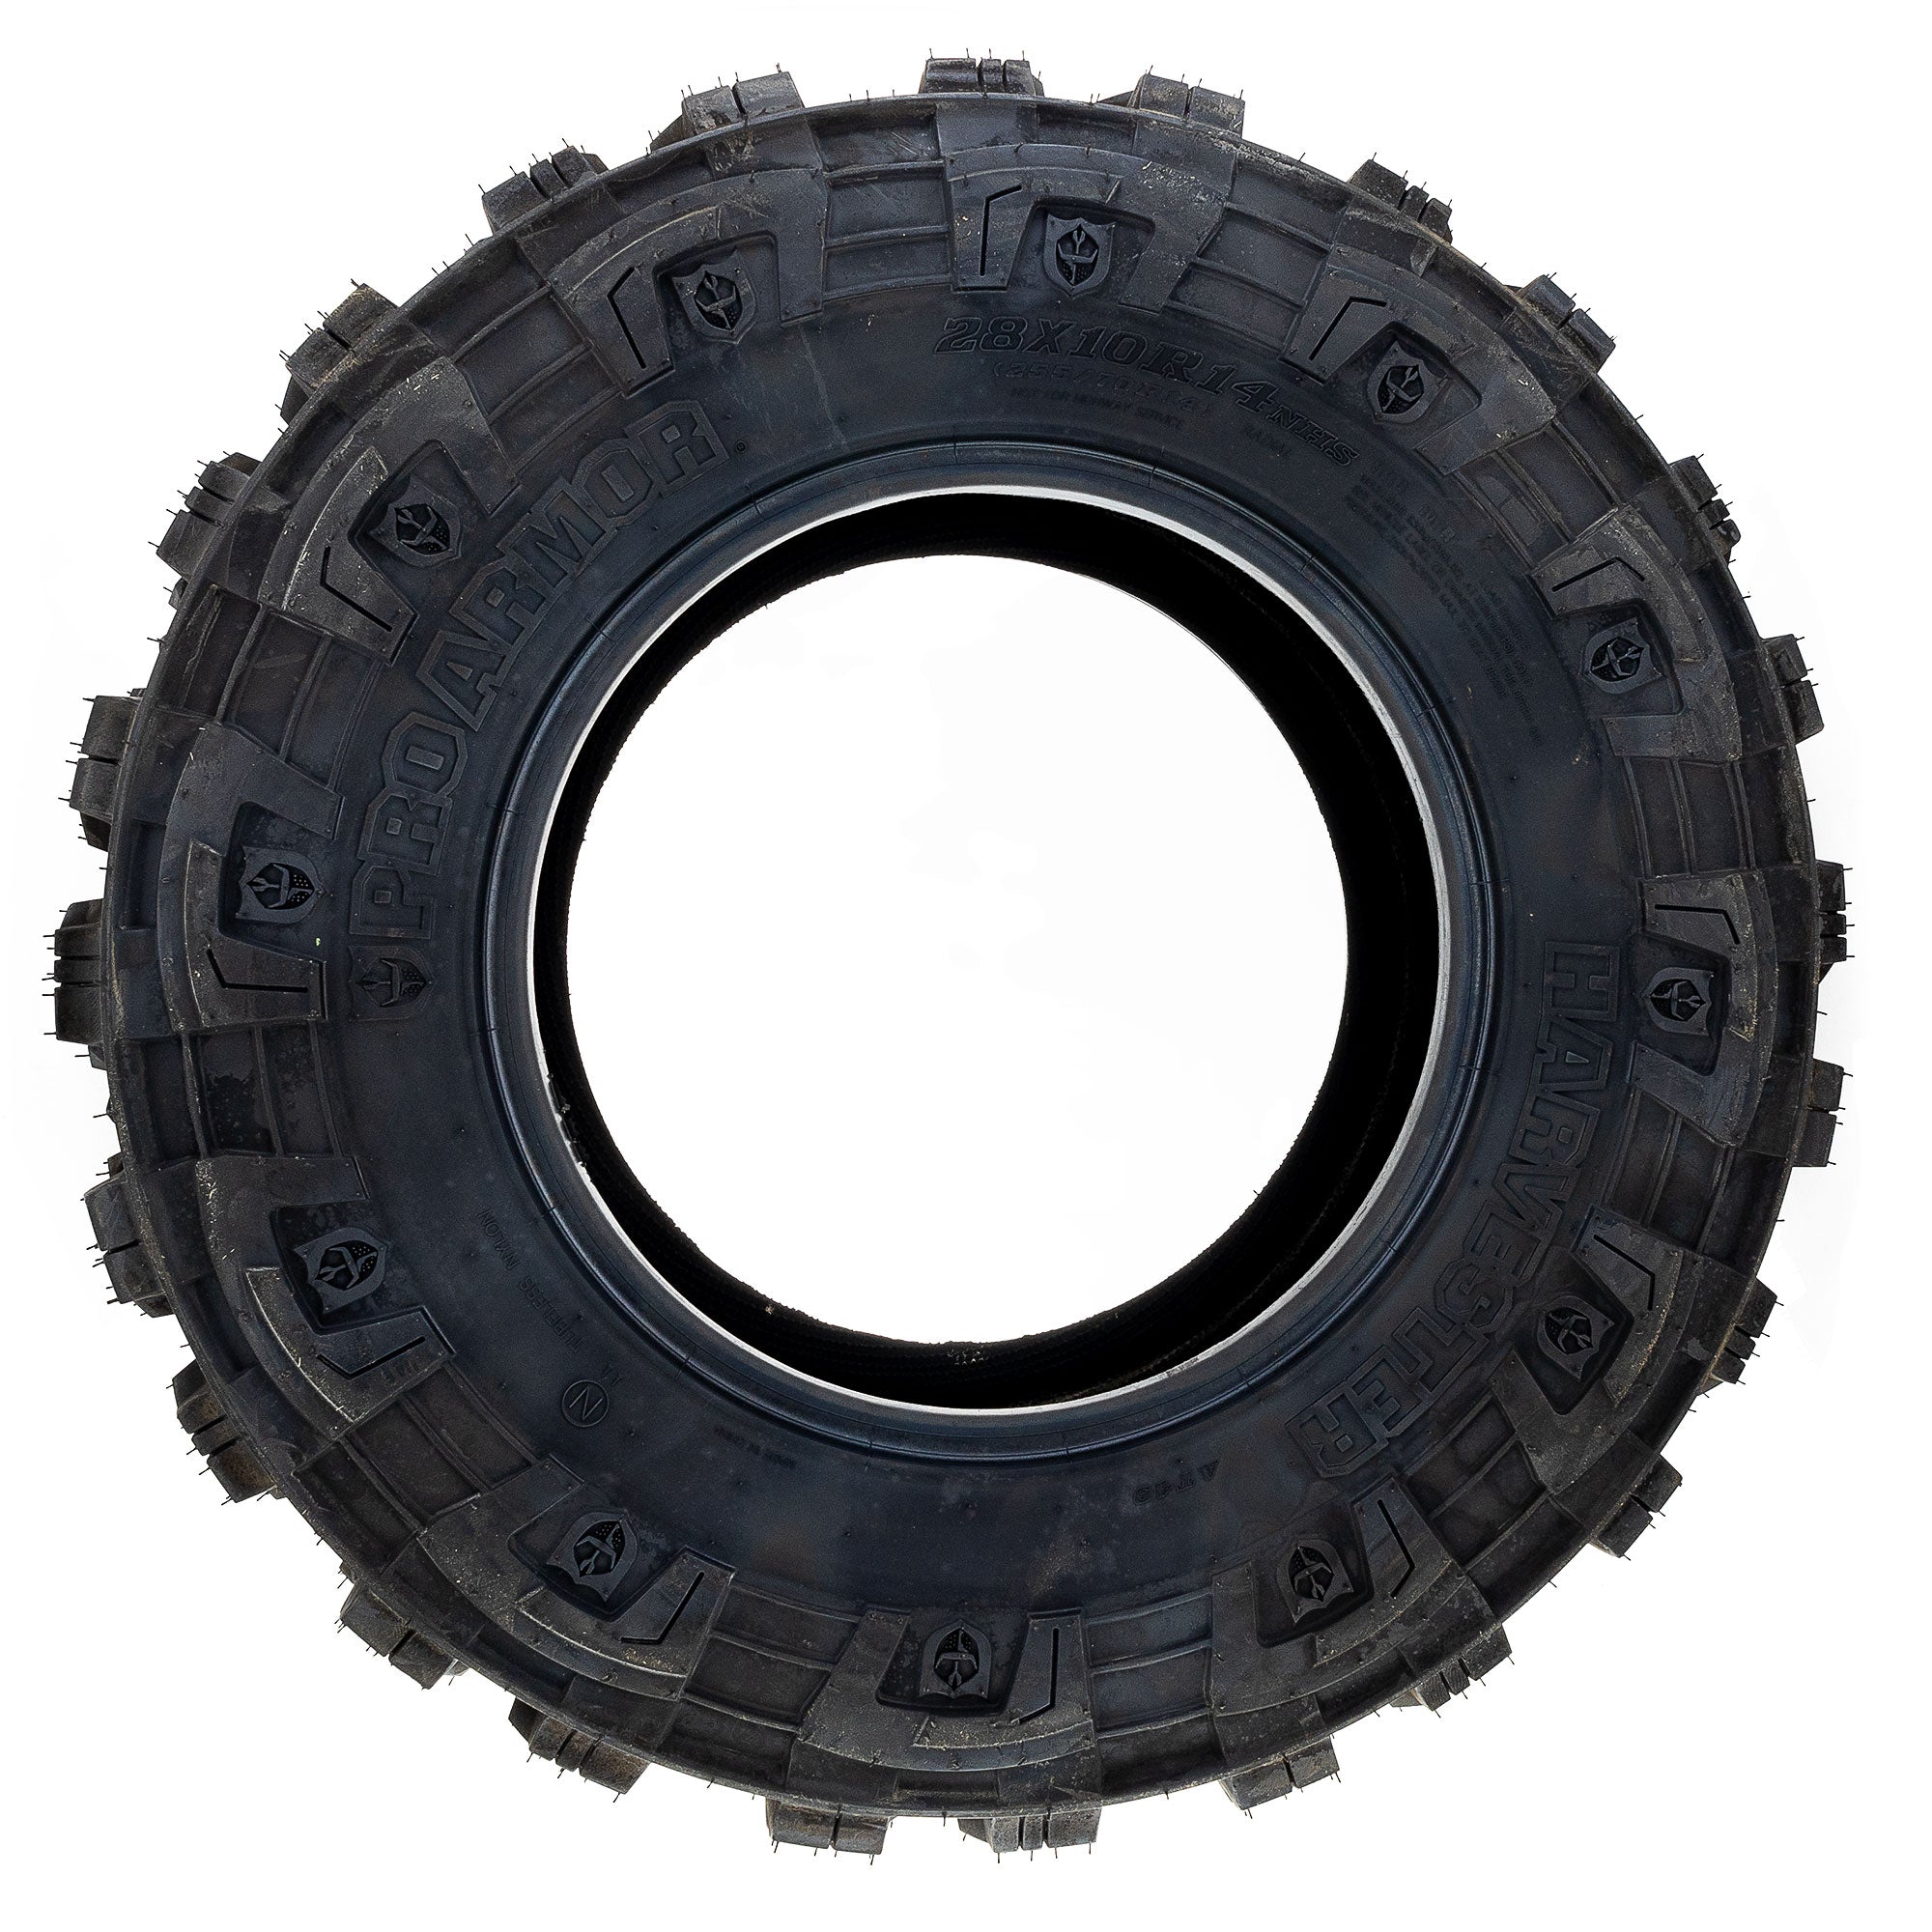 Pro Armor 5416347 Front/Rear Harvester Tire 28X10R14